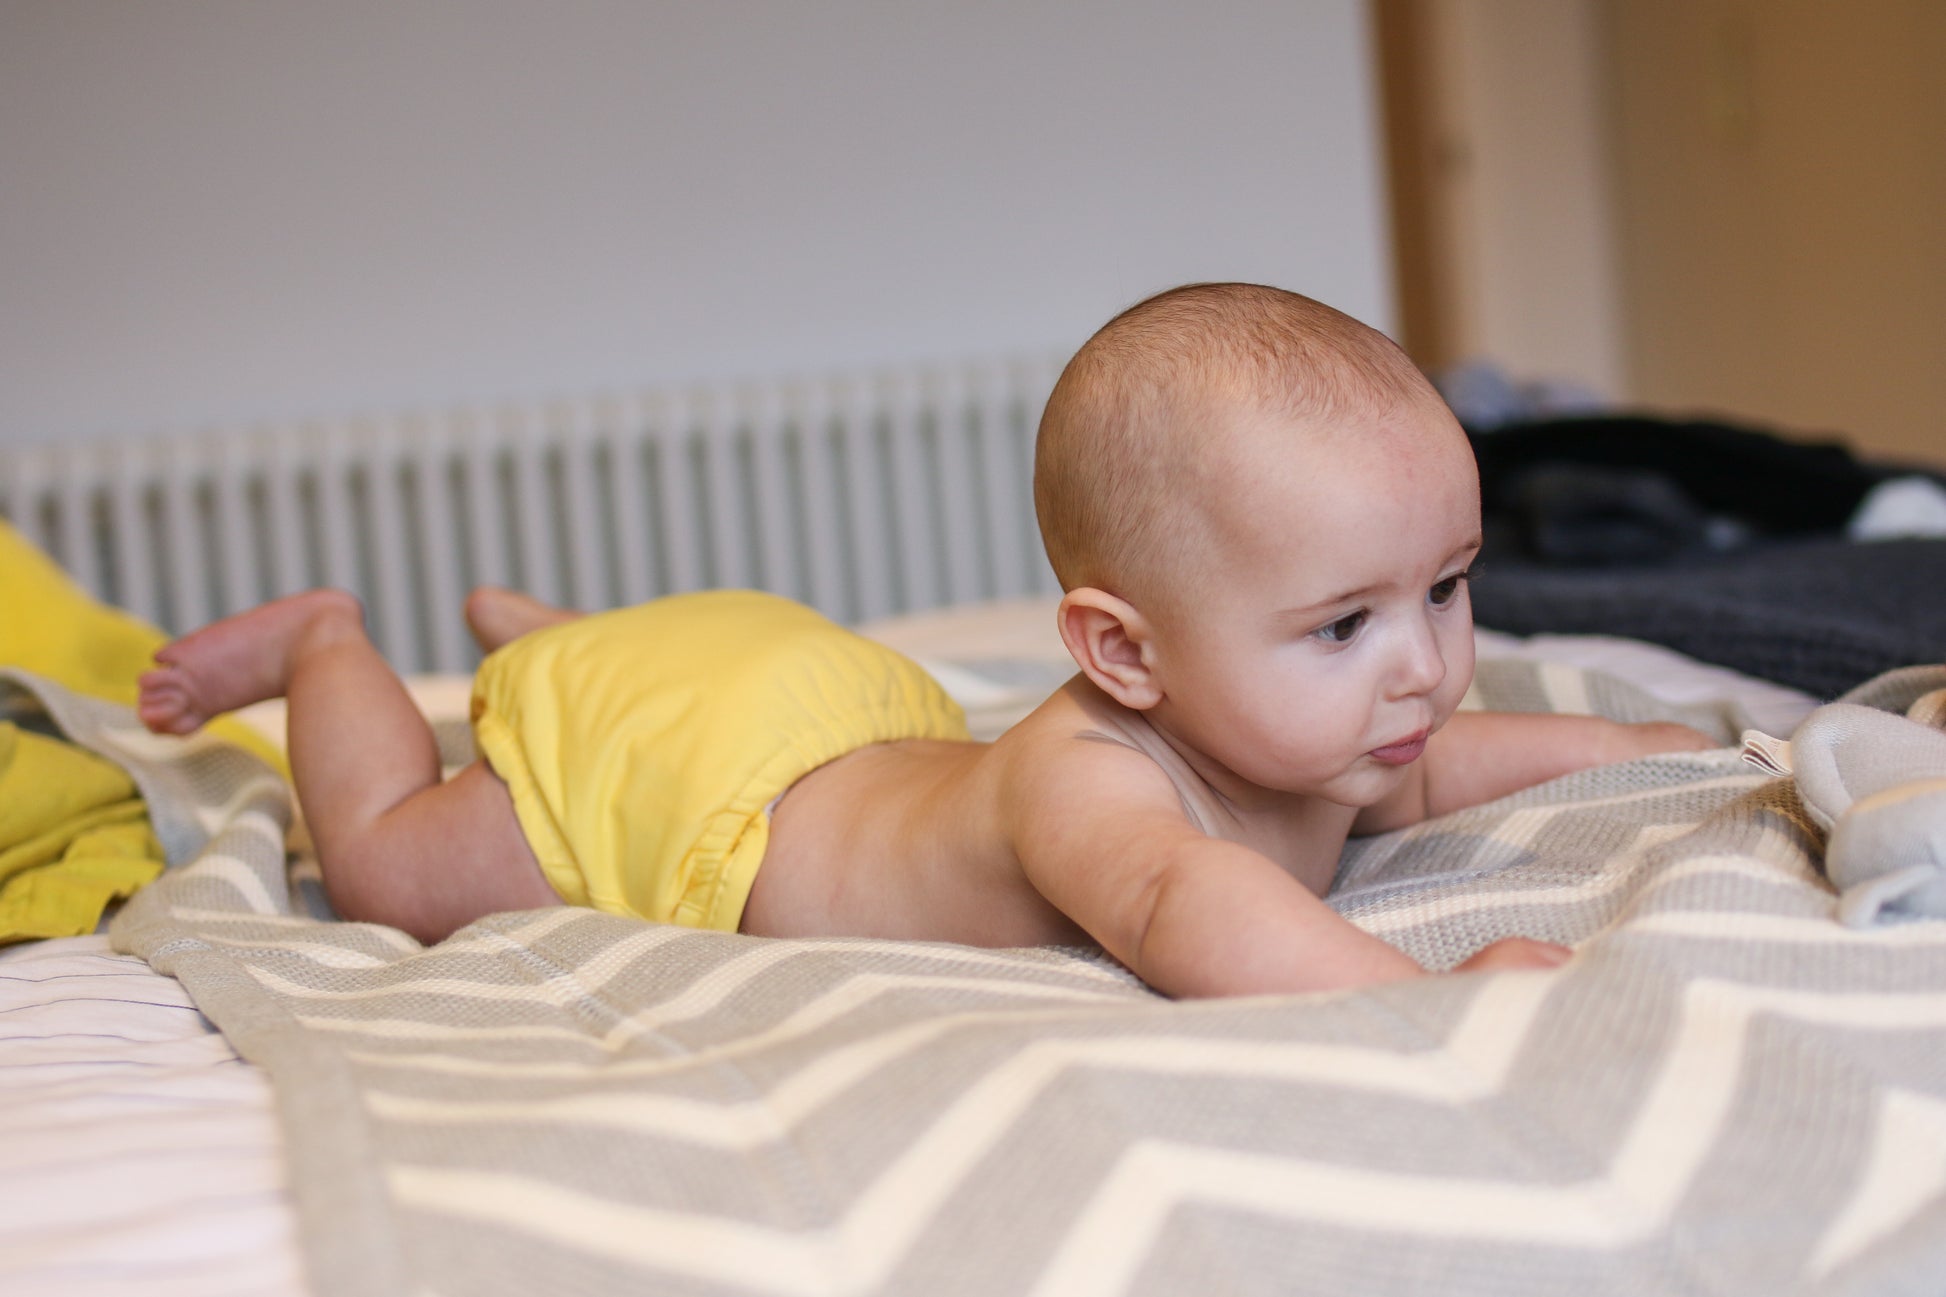 Image shows a young baby lying on their front on a bed wearing a yellow reusable cloth nappy. 